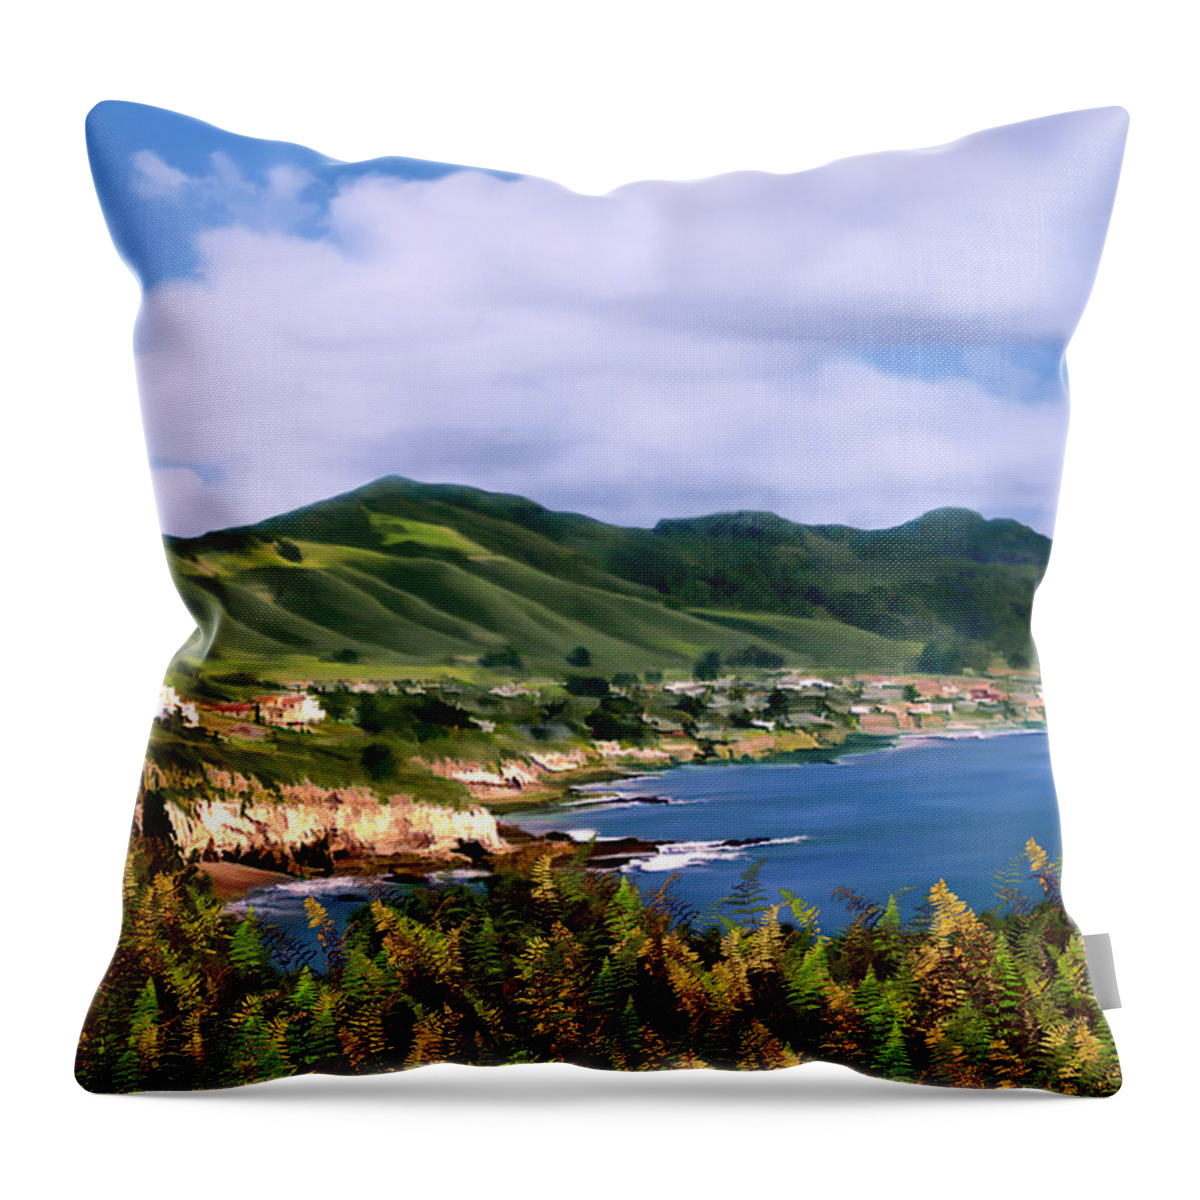 Cove Throw Pillow featuring the photograph Pirates Cove by Kurt Van Wagner